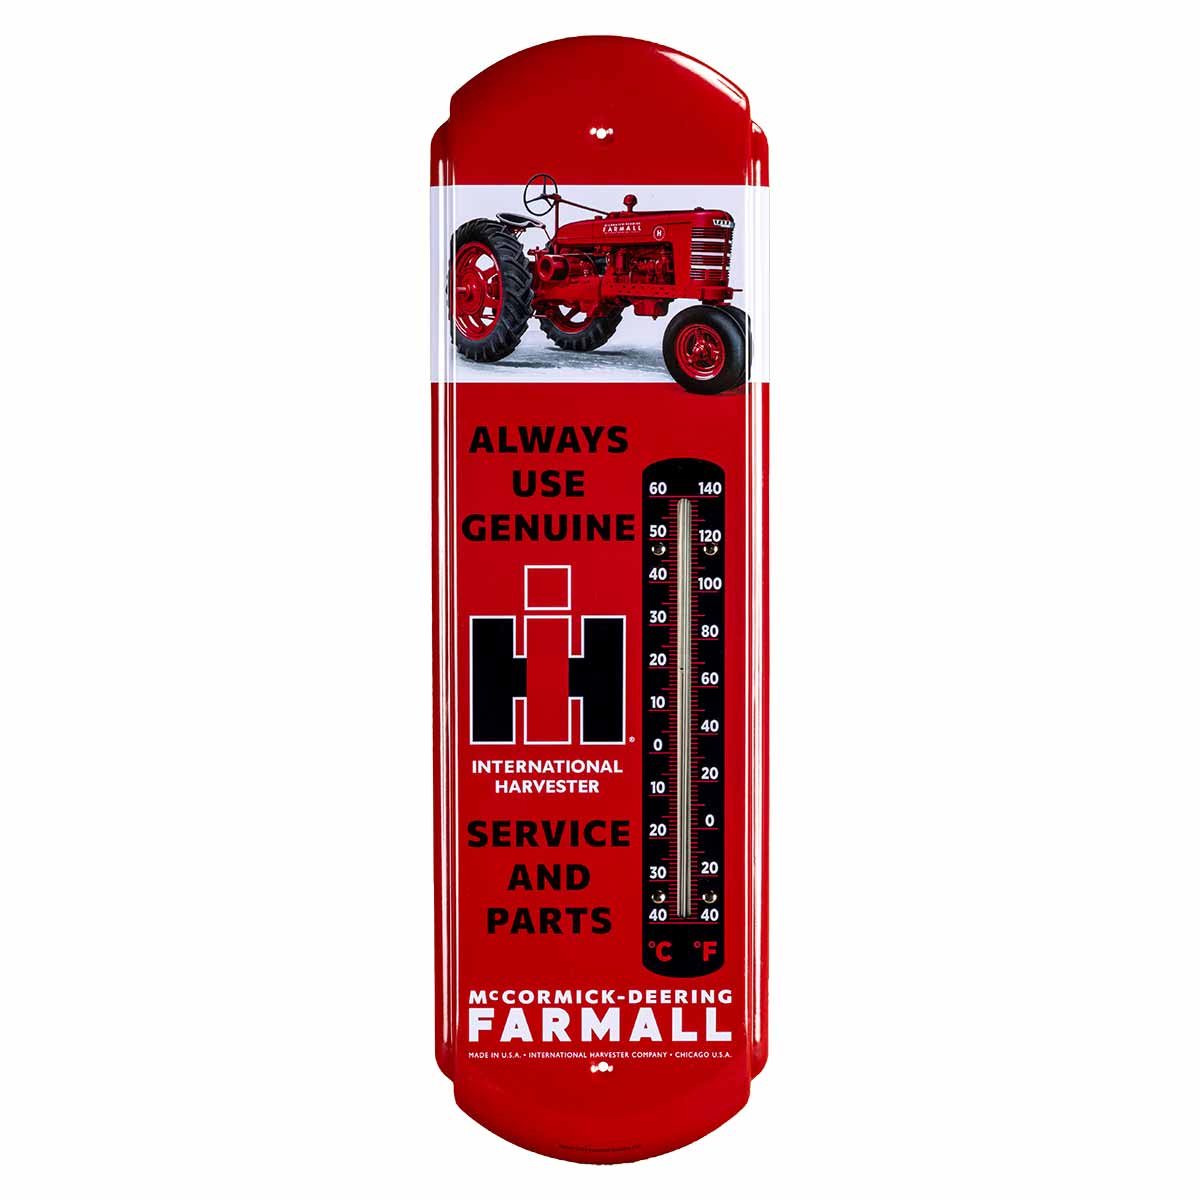 IH Farmall Red Tractor Metal Thermometer